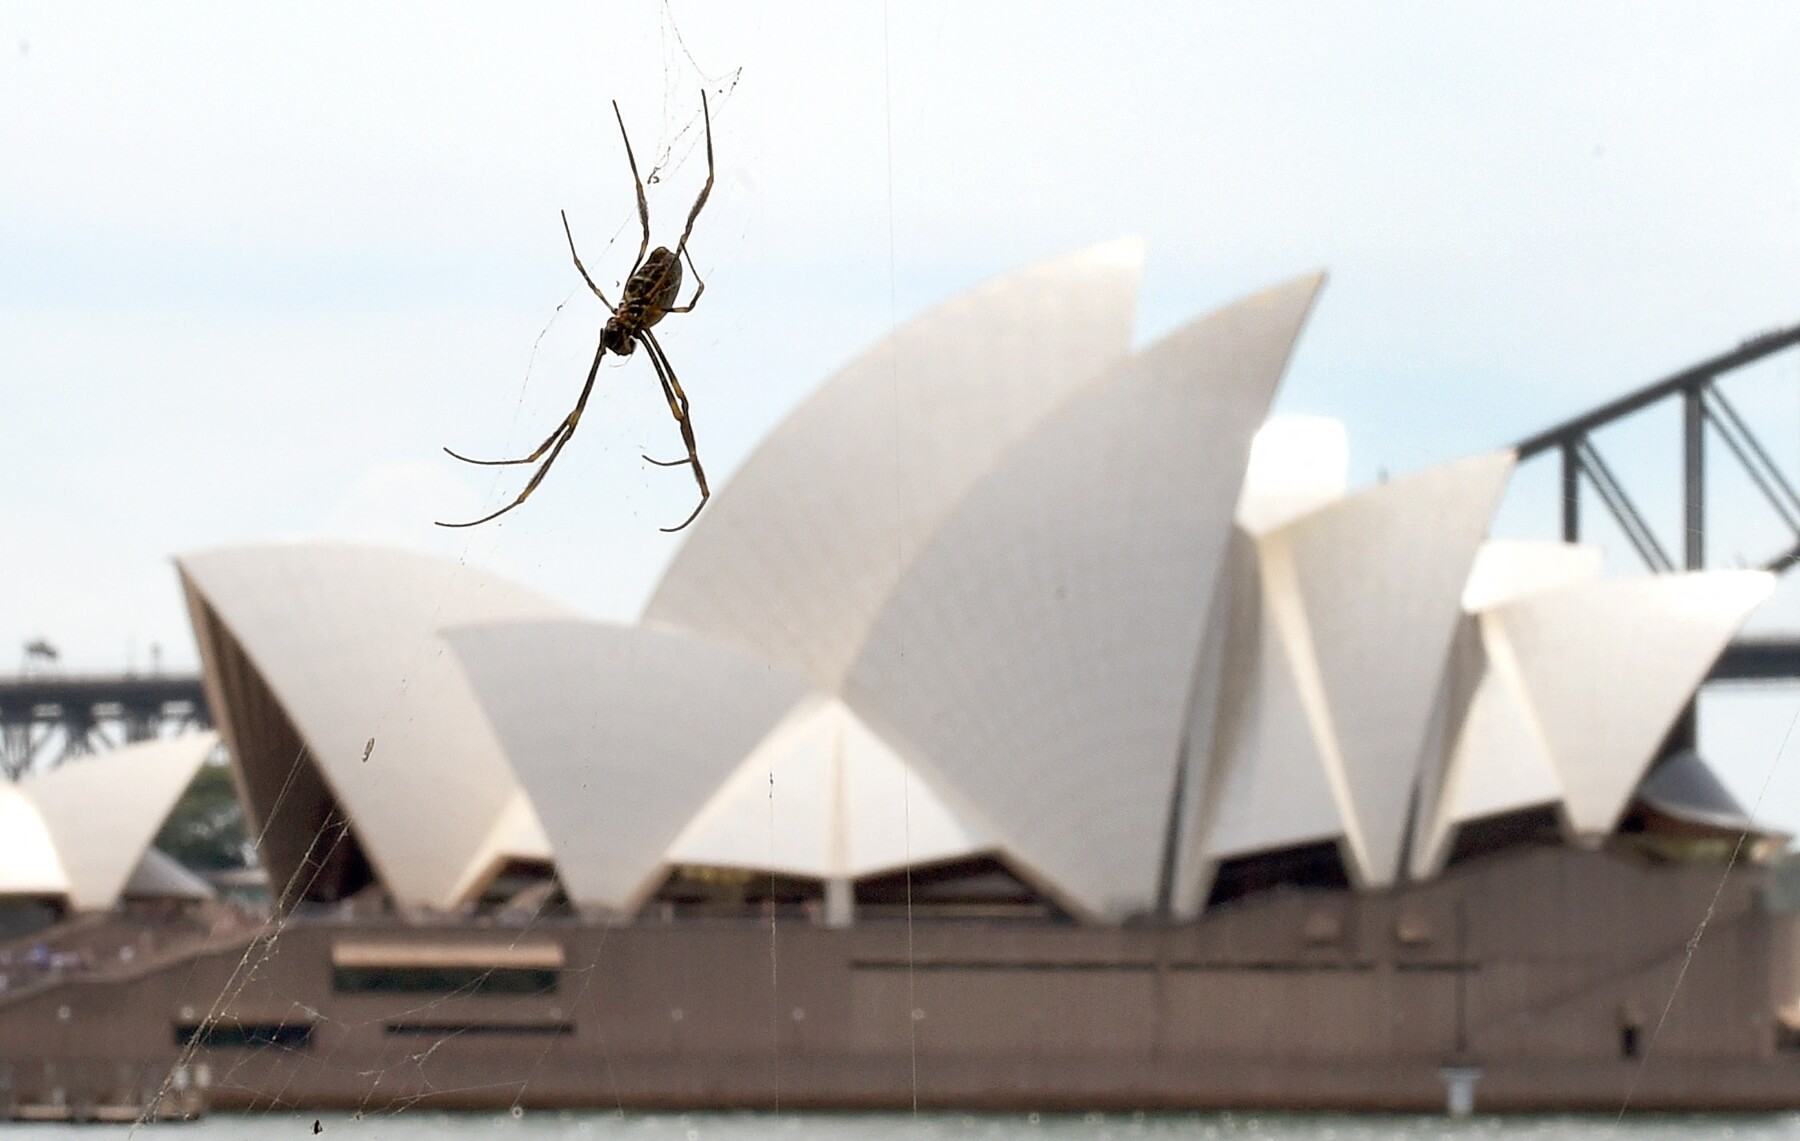 5 poisonous spiders and insects in Australia explained for int'l students